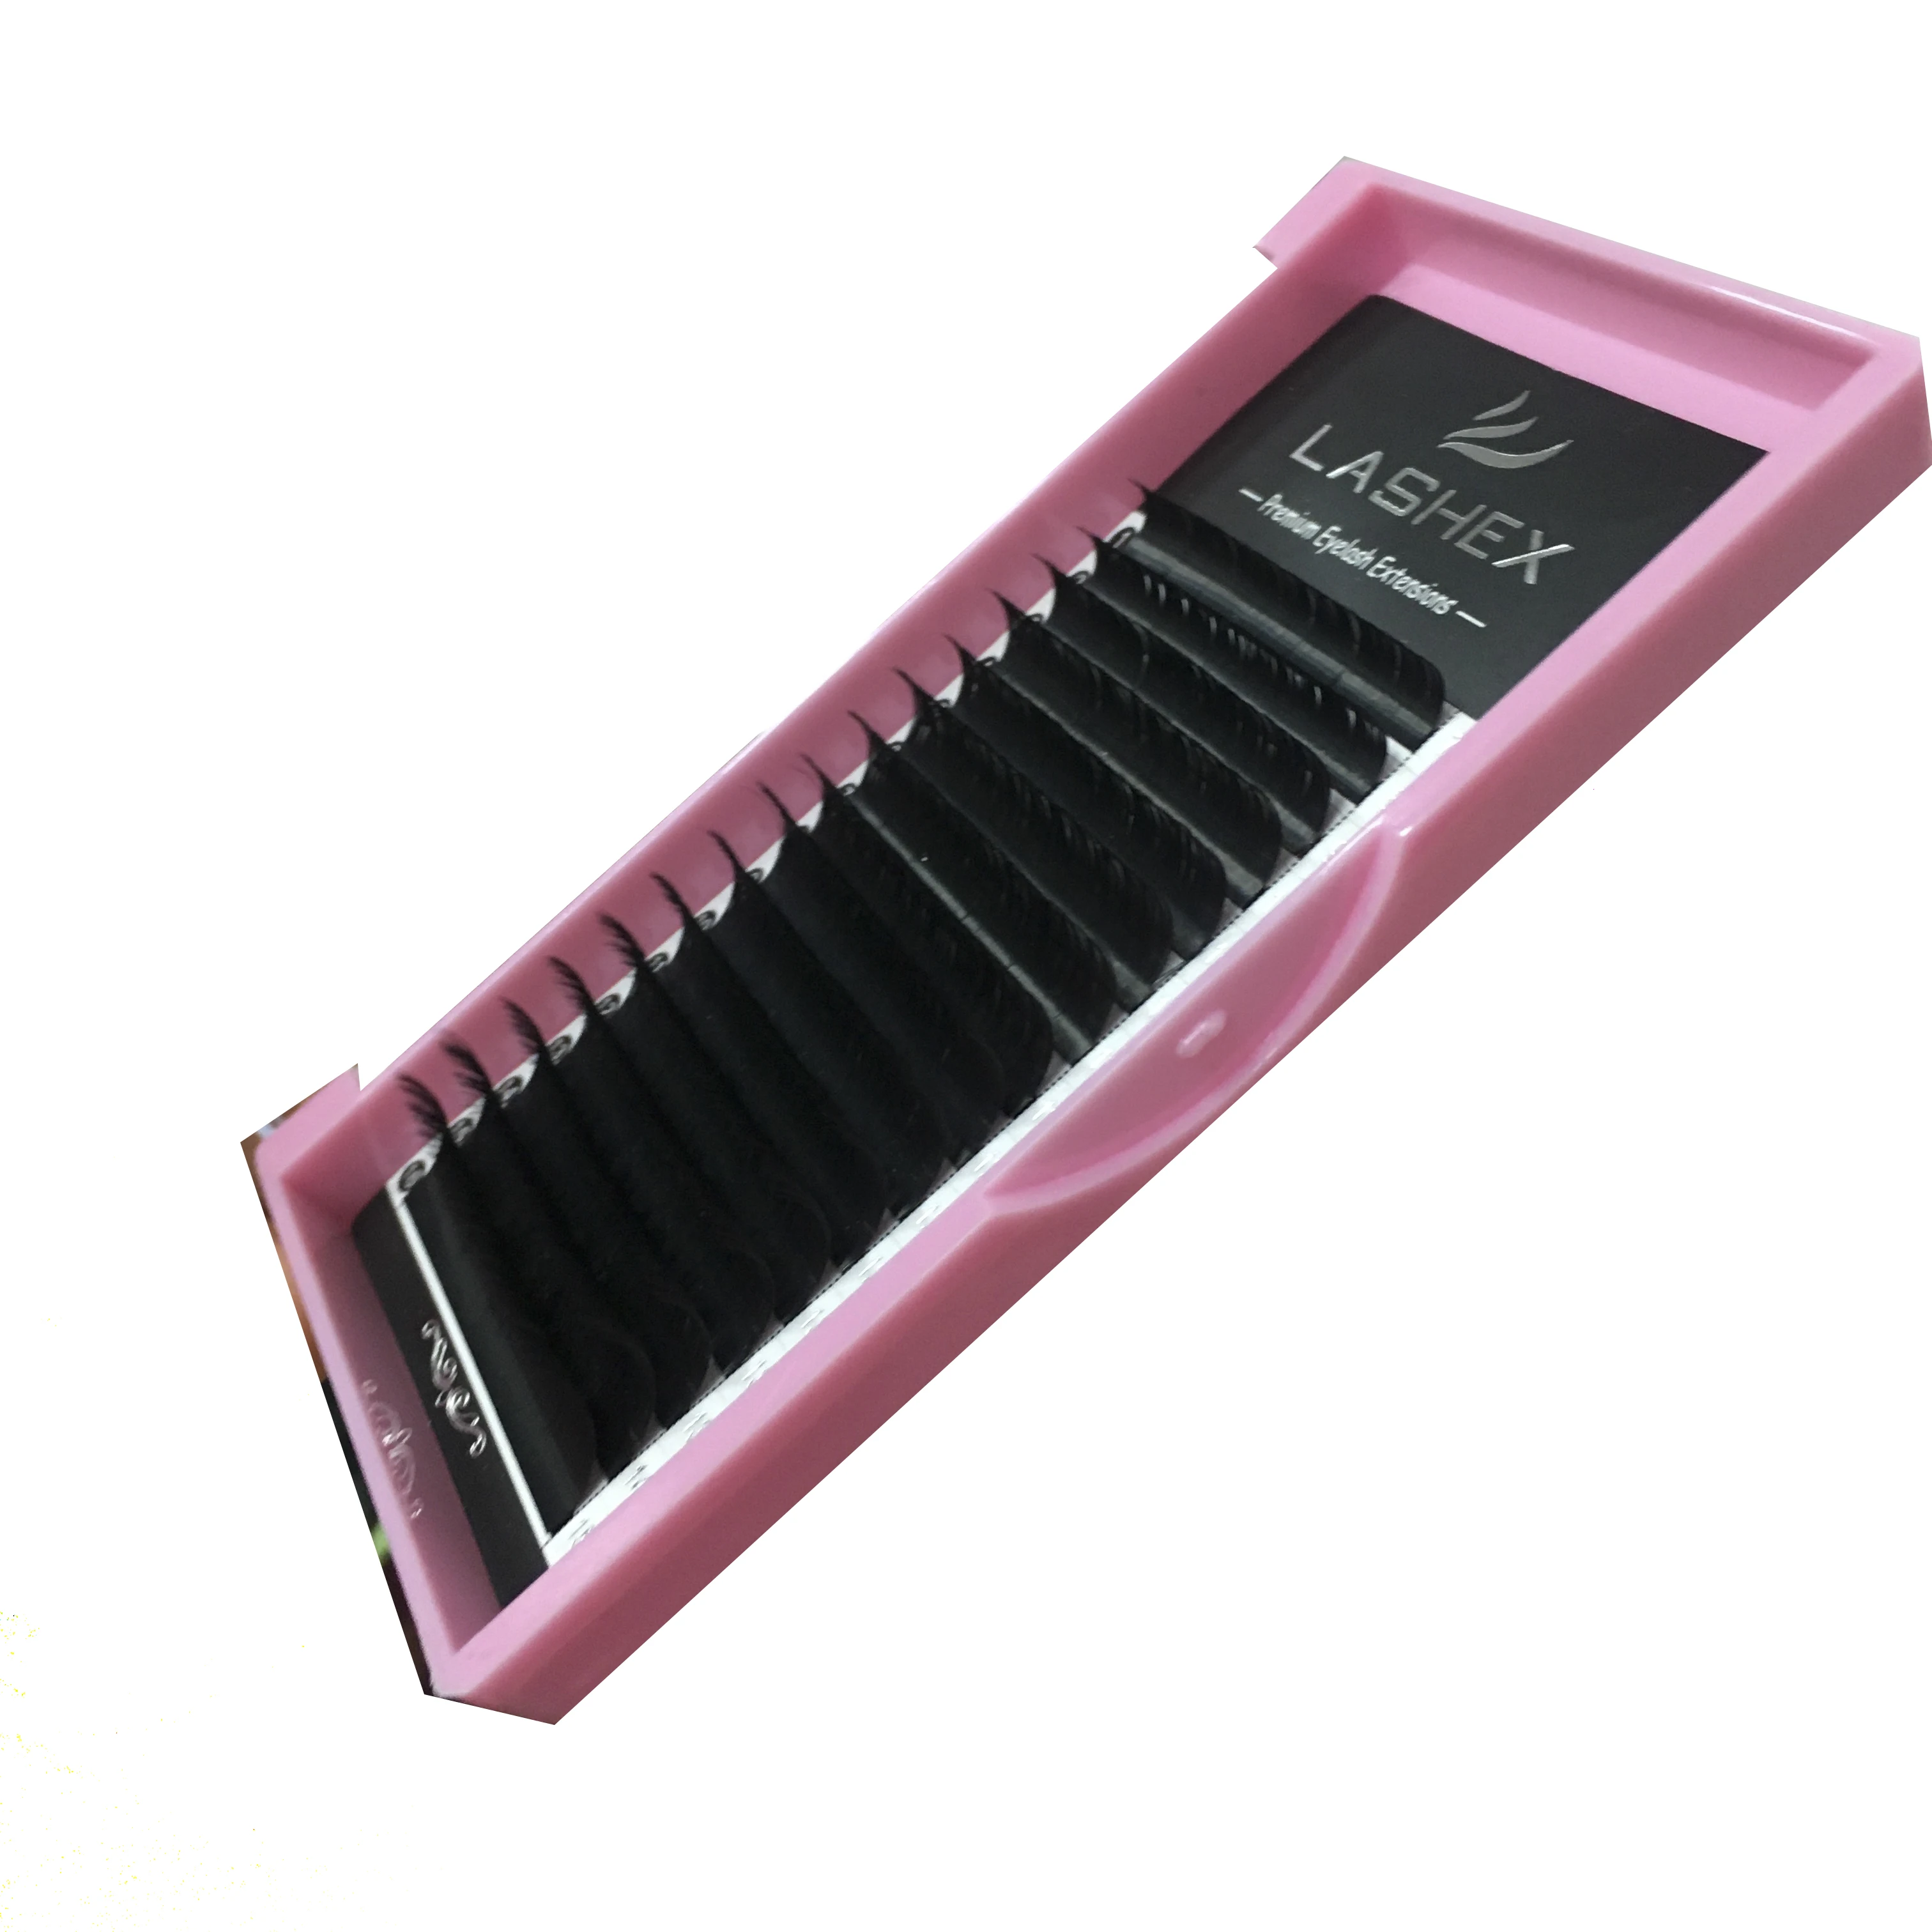 

High quality 8-16mm flat lashes ellipse flat eyelash extensions lash in 0.15 0.20thickness With J B C D Curl, Natural black or customization